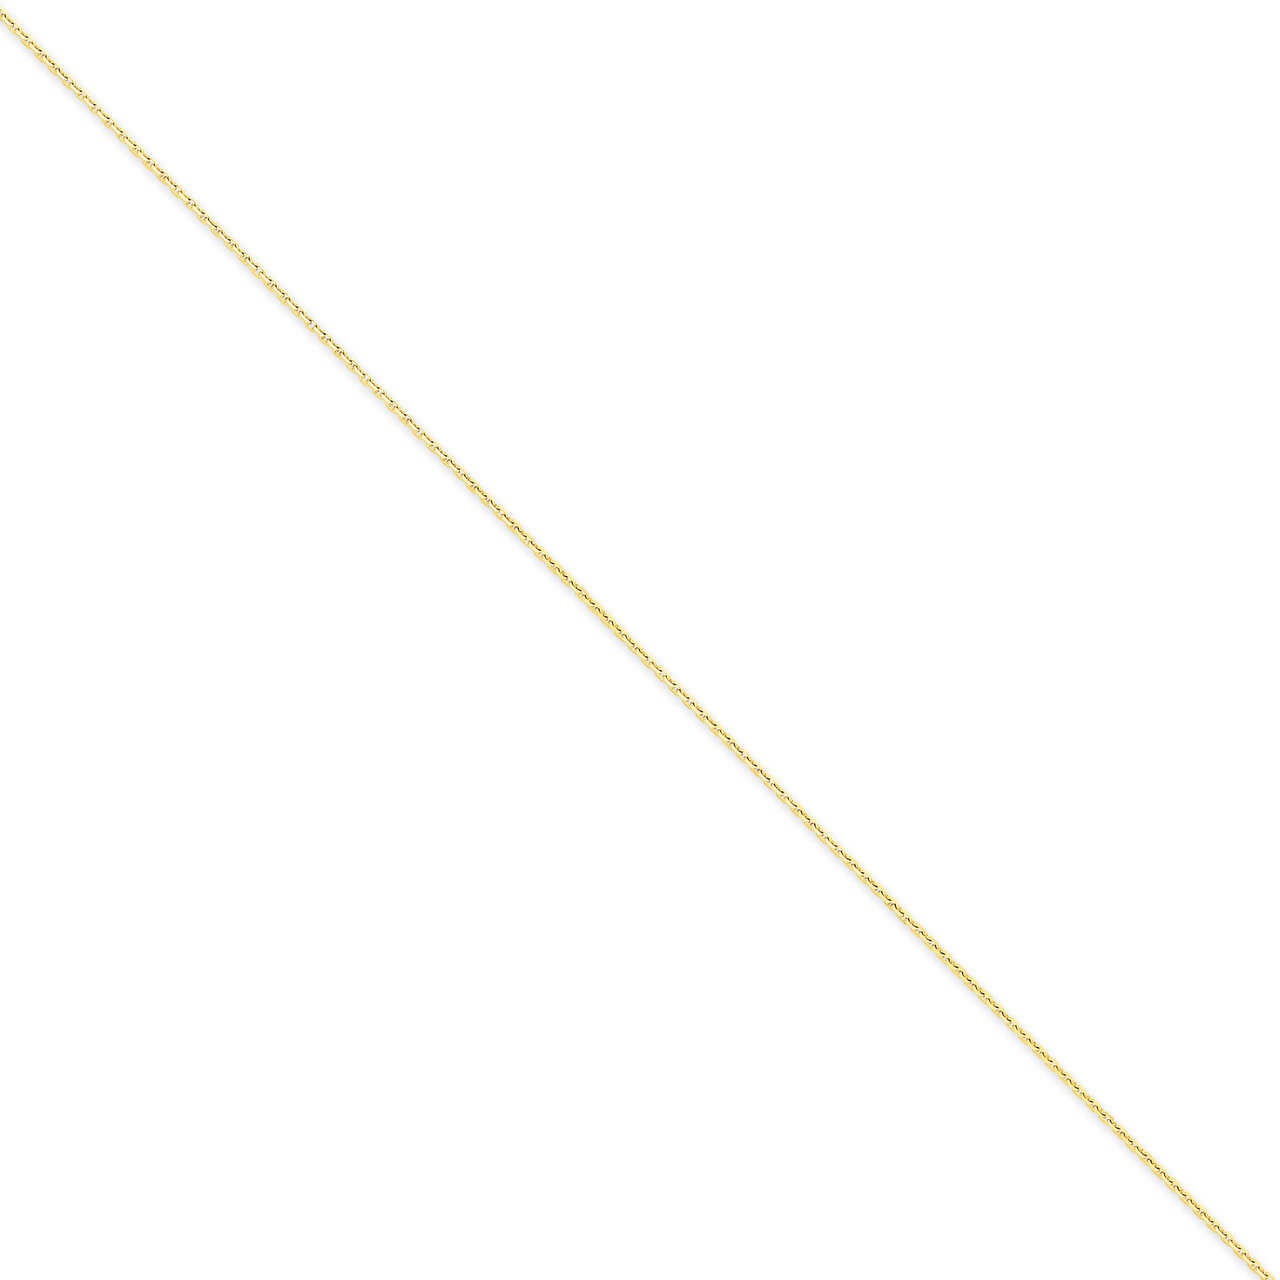 1.3mm Solid Diamond-cut Cable Chain 14 Inch 14k Gold PEN140-14